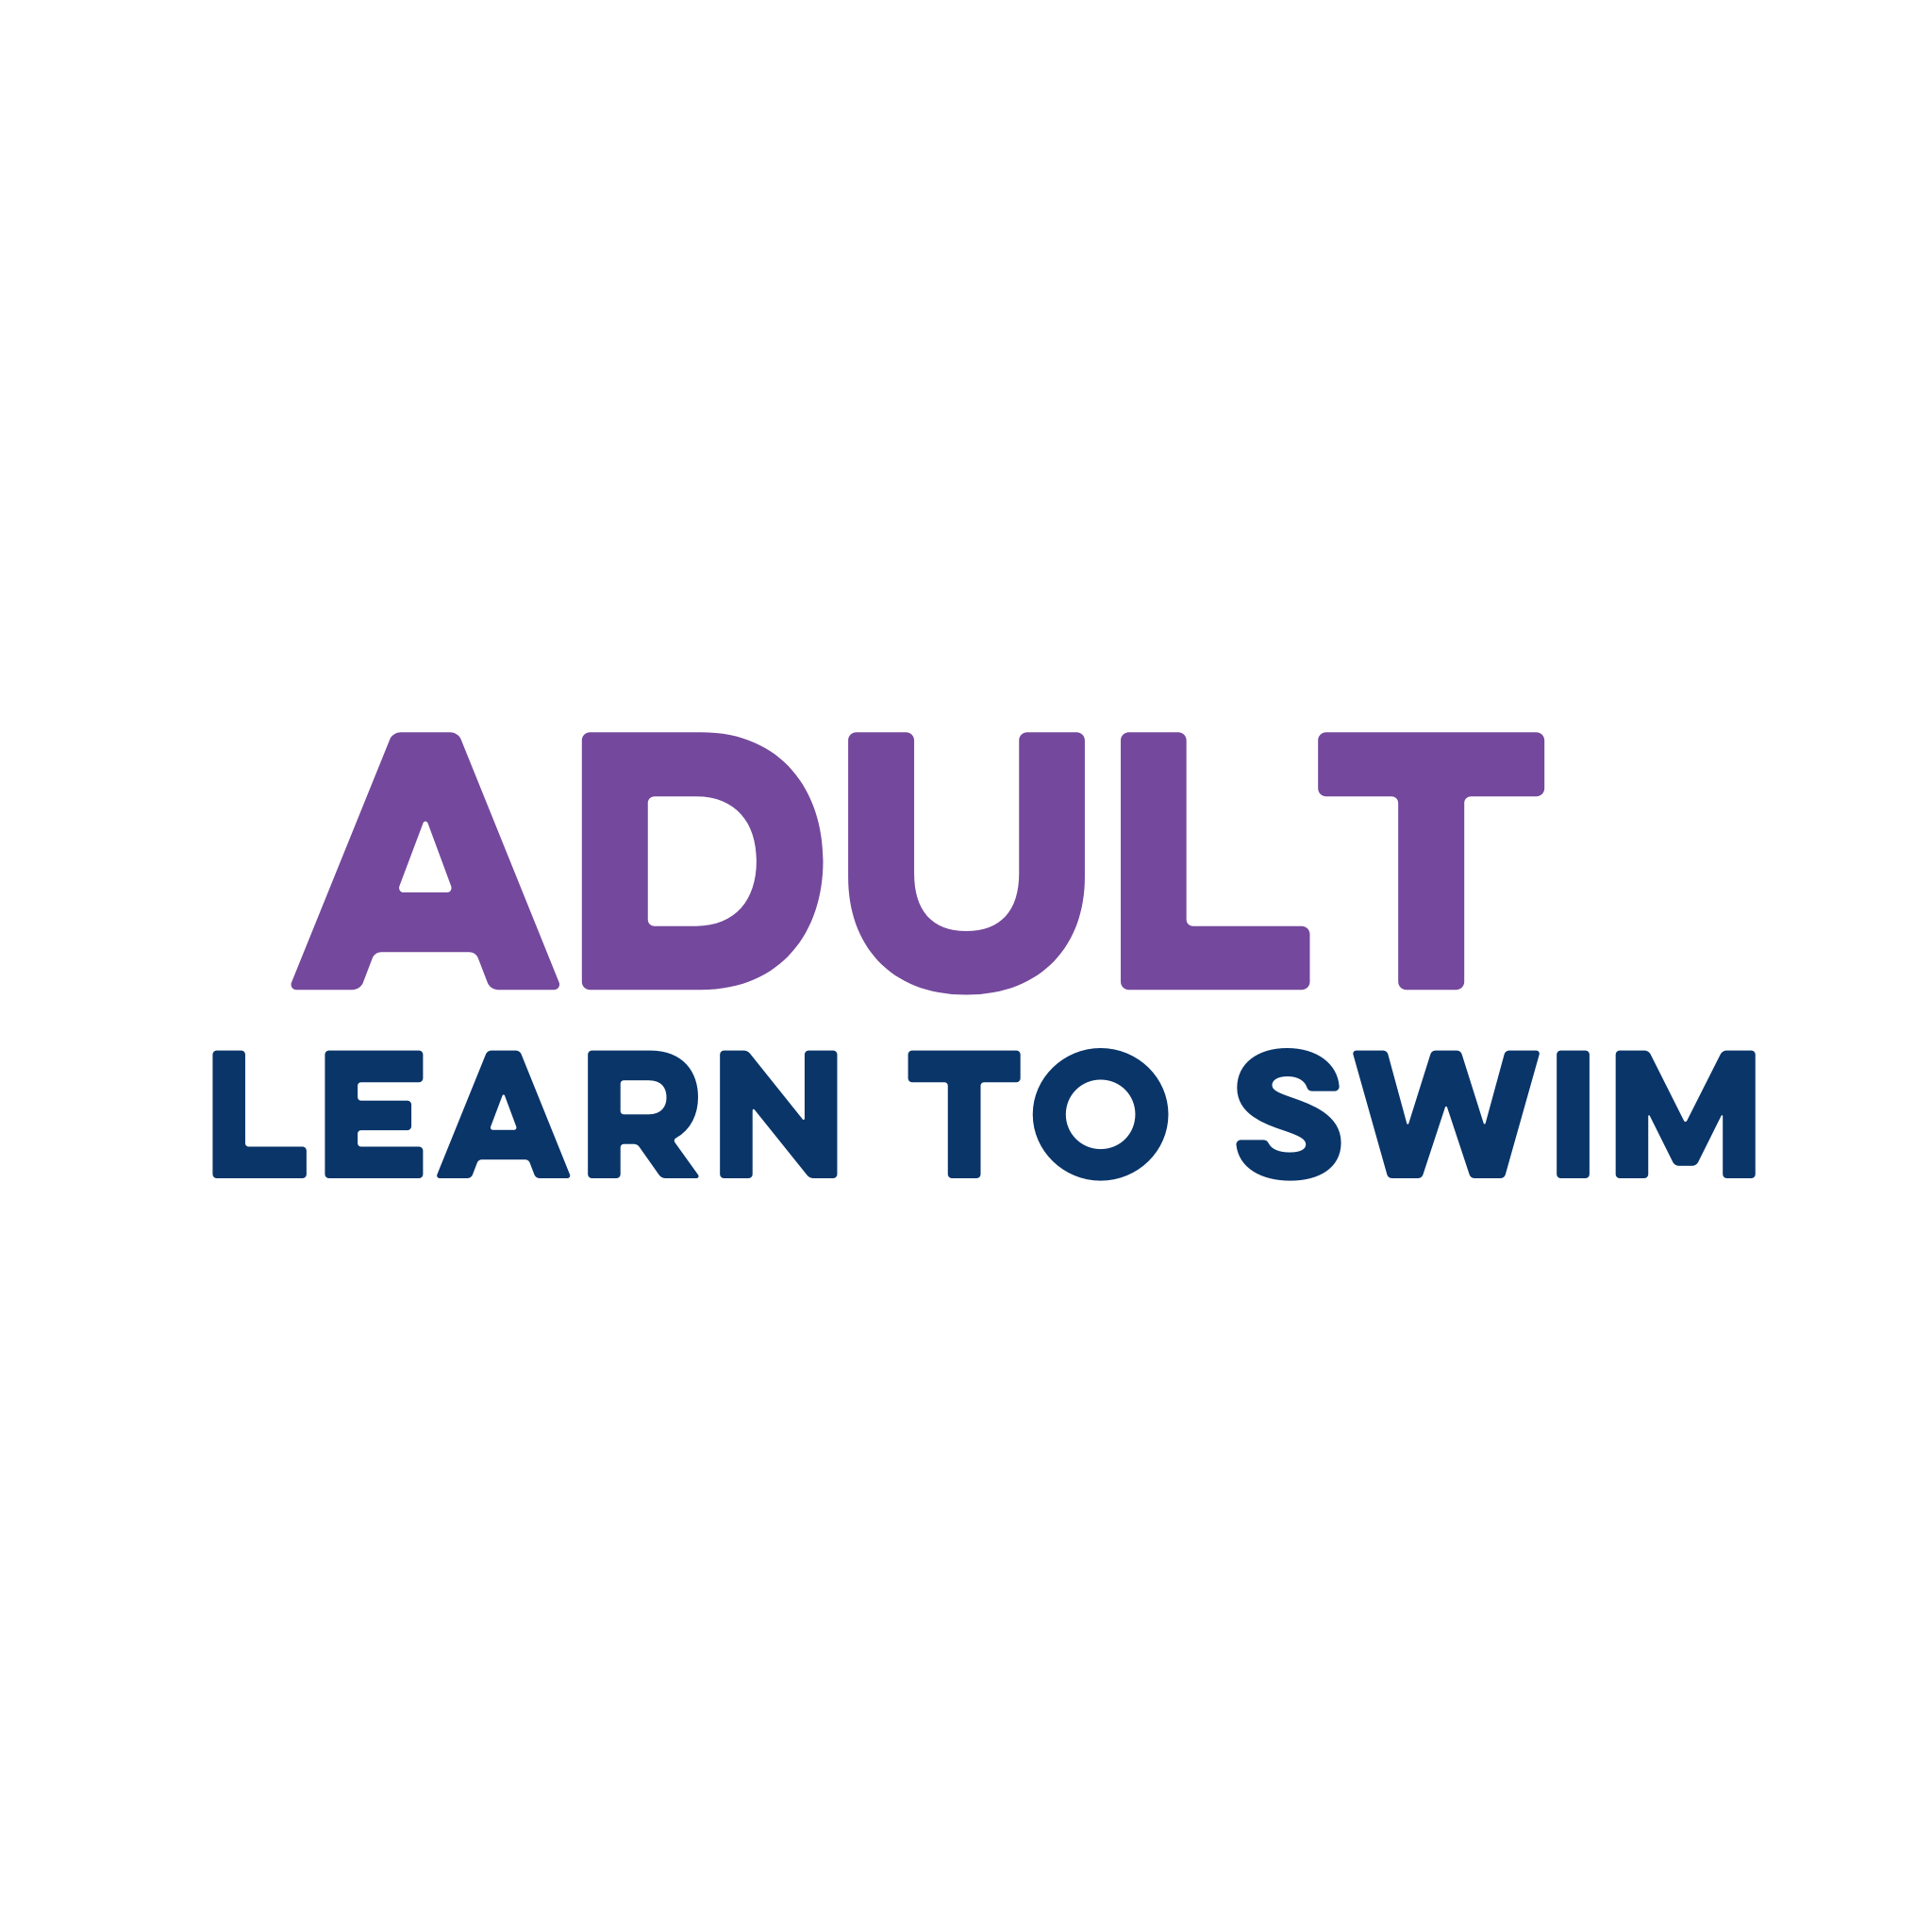 Adult Learn to Swim